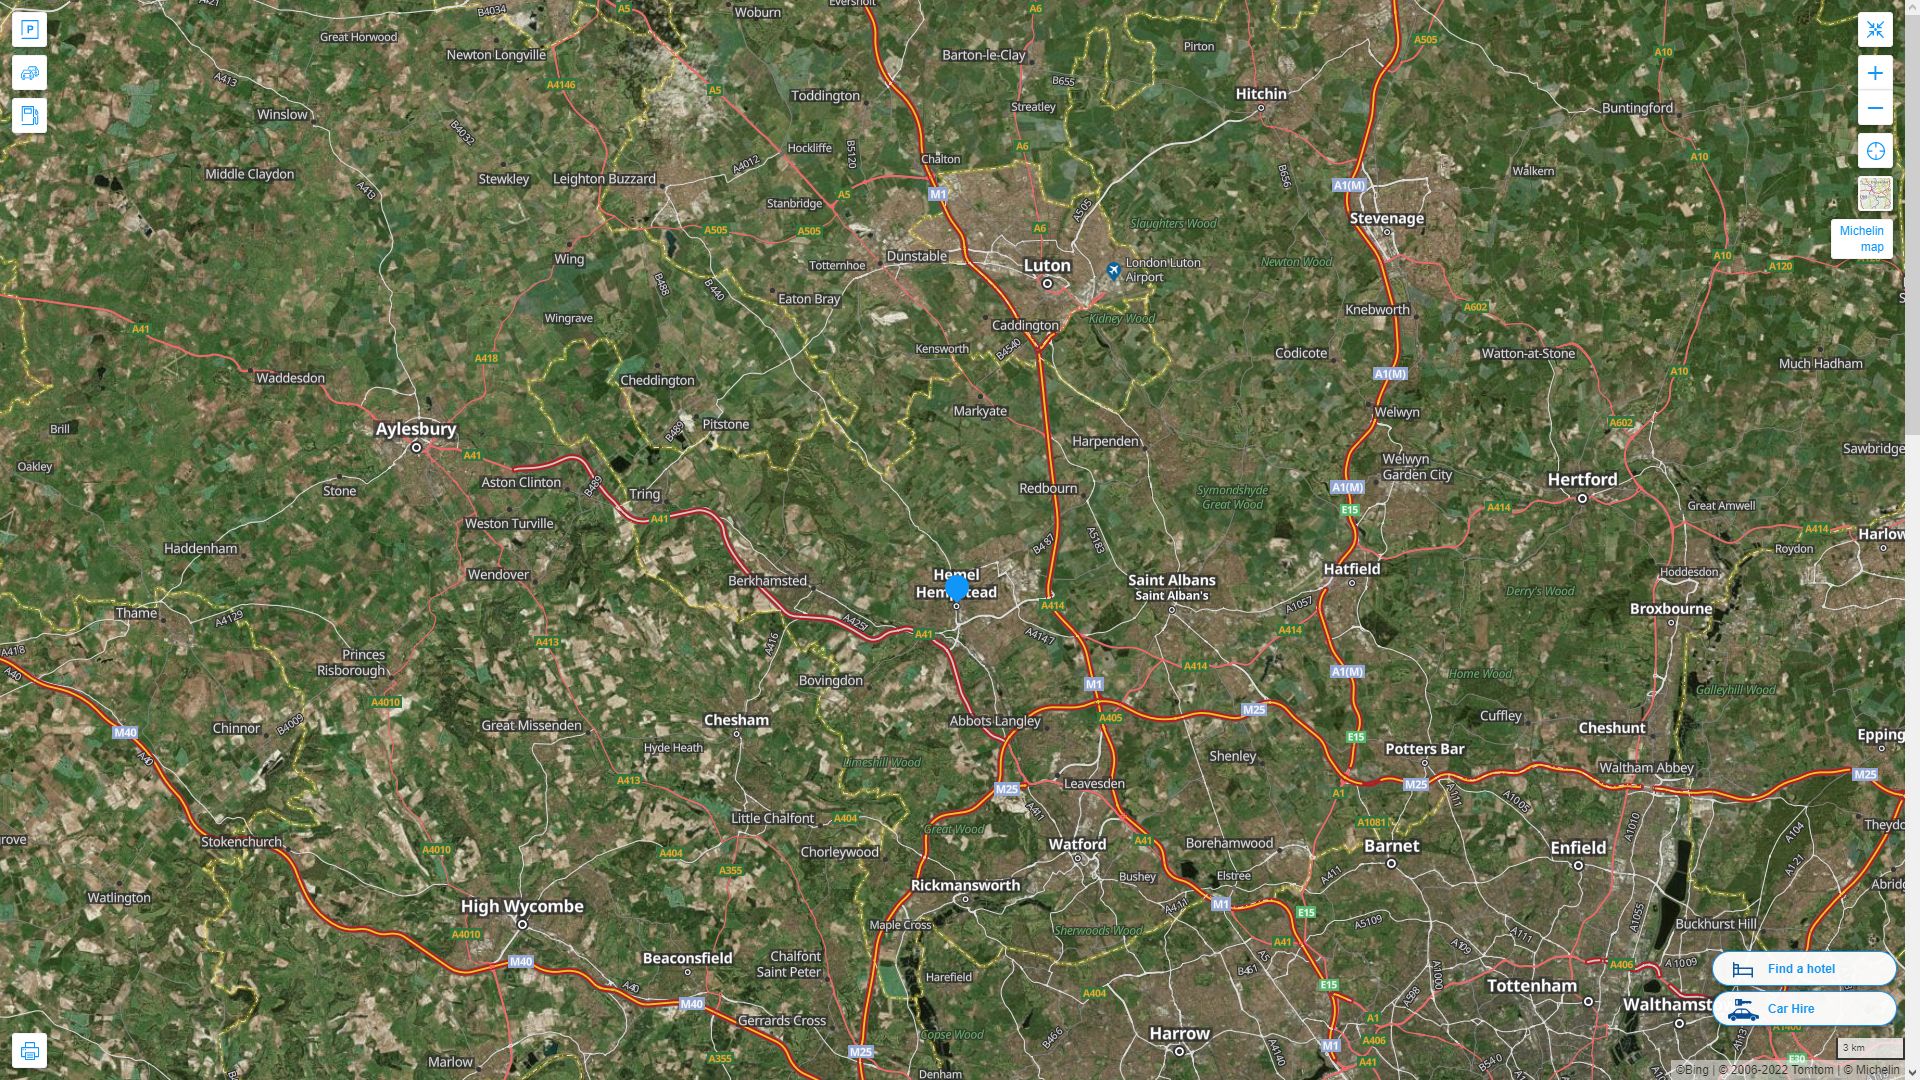 Hemel Hempstead Highway and Road Map with Satellite View